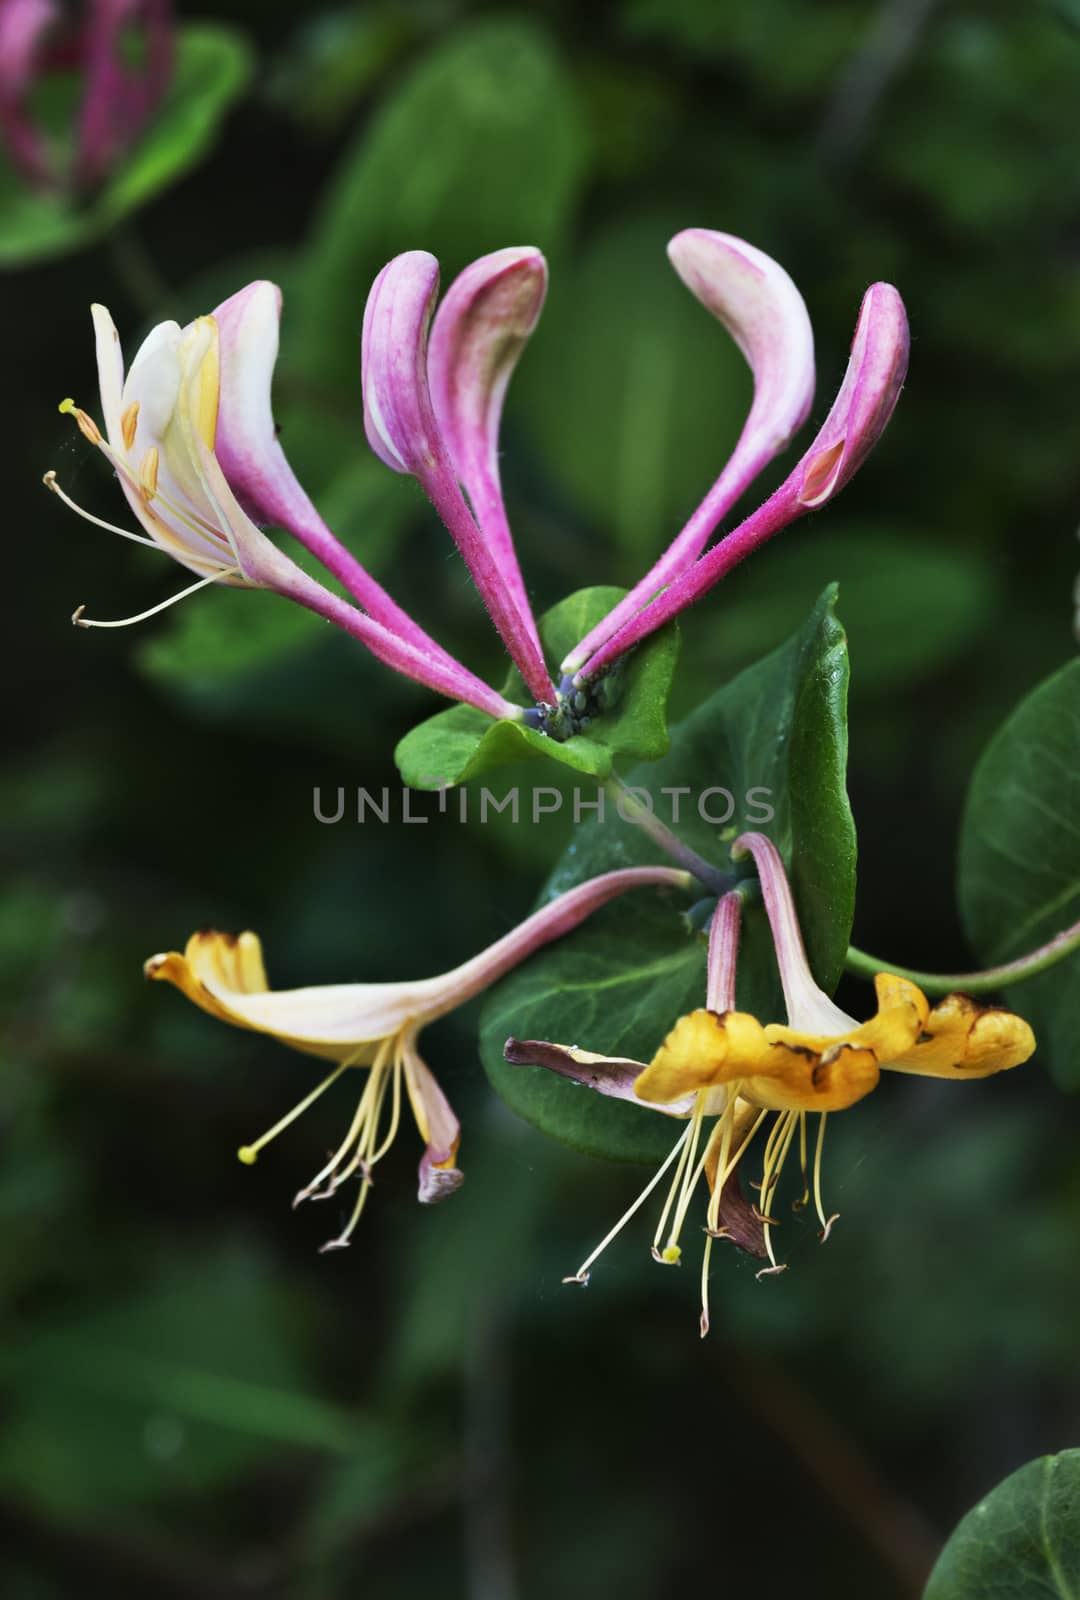  Blossomed honeysuckle flower -lonicera caprifolium - , the thin stems extend radially , the background is green and out of focus , saturated colors ,